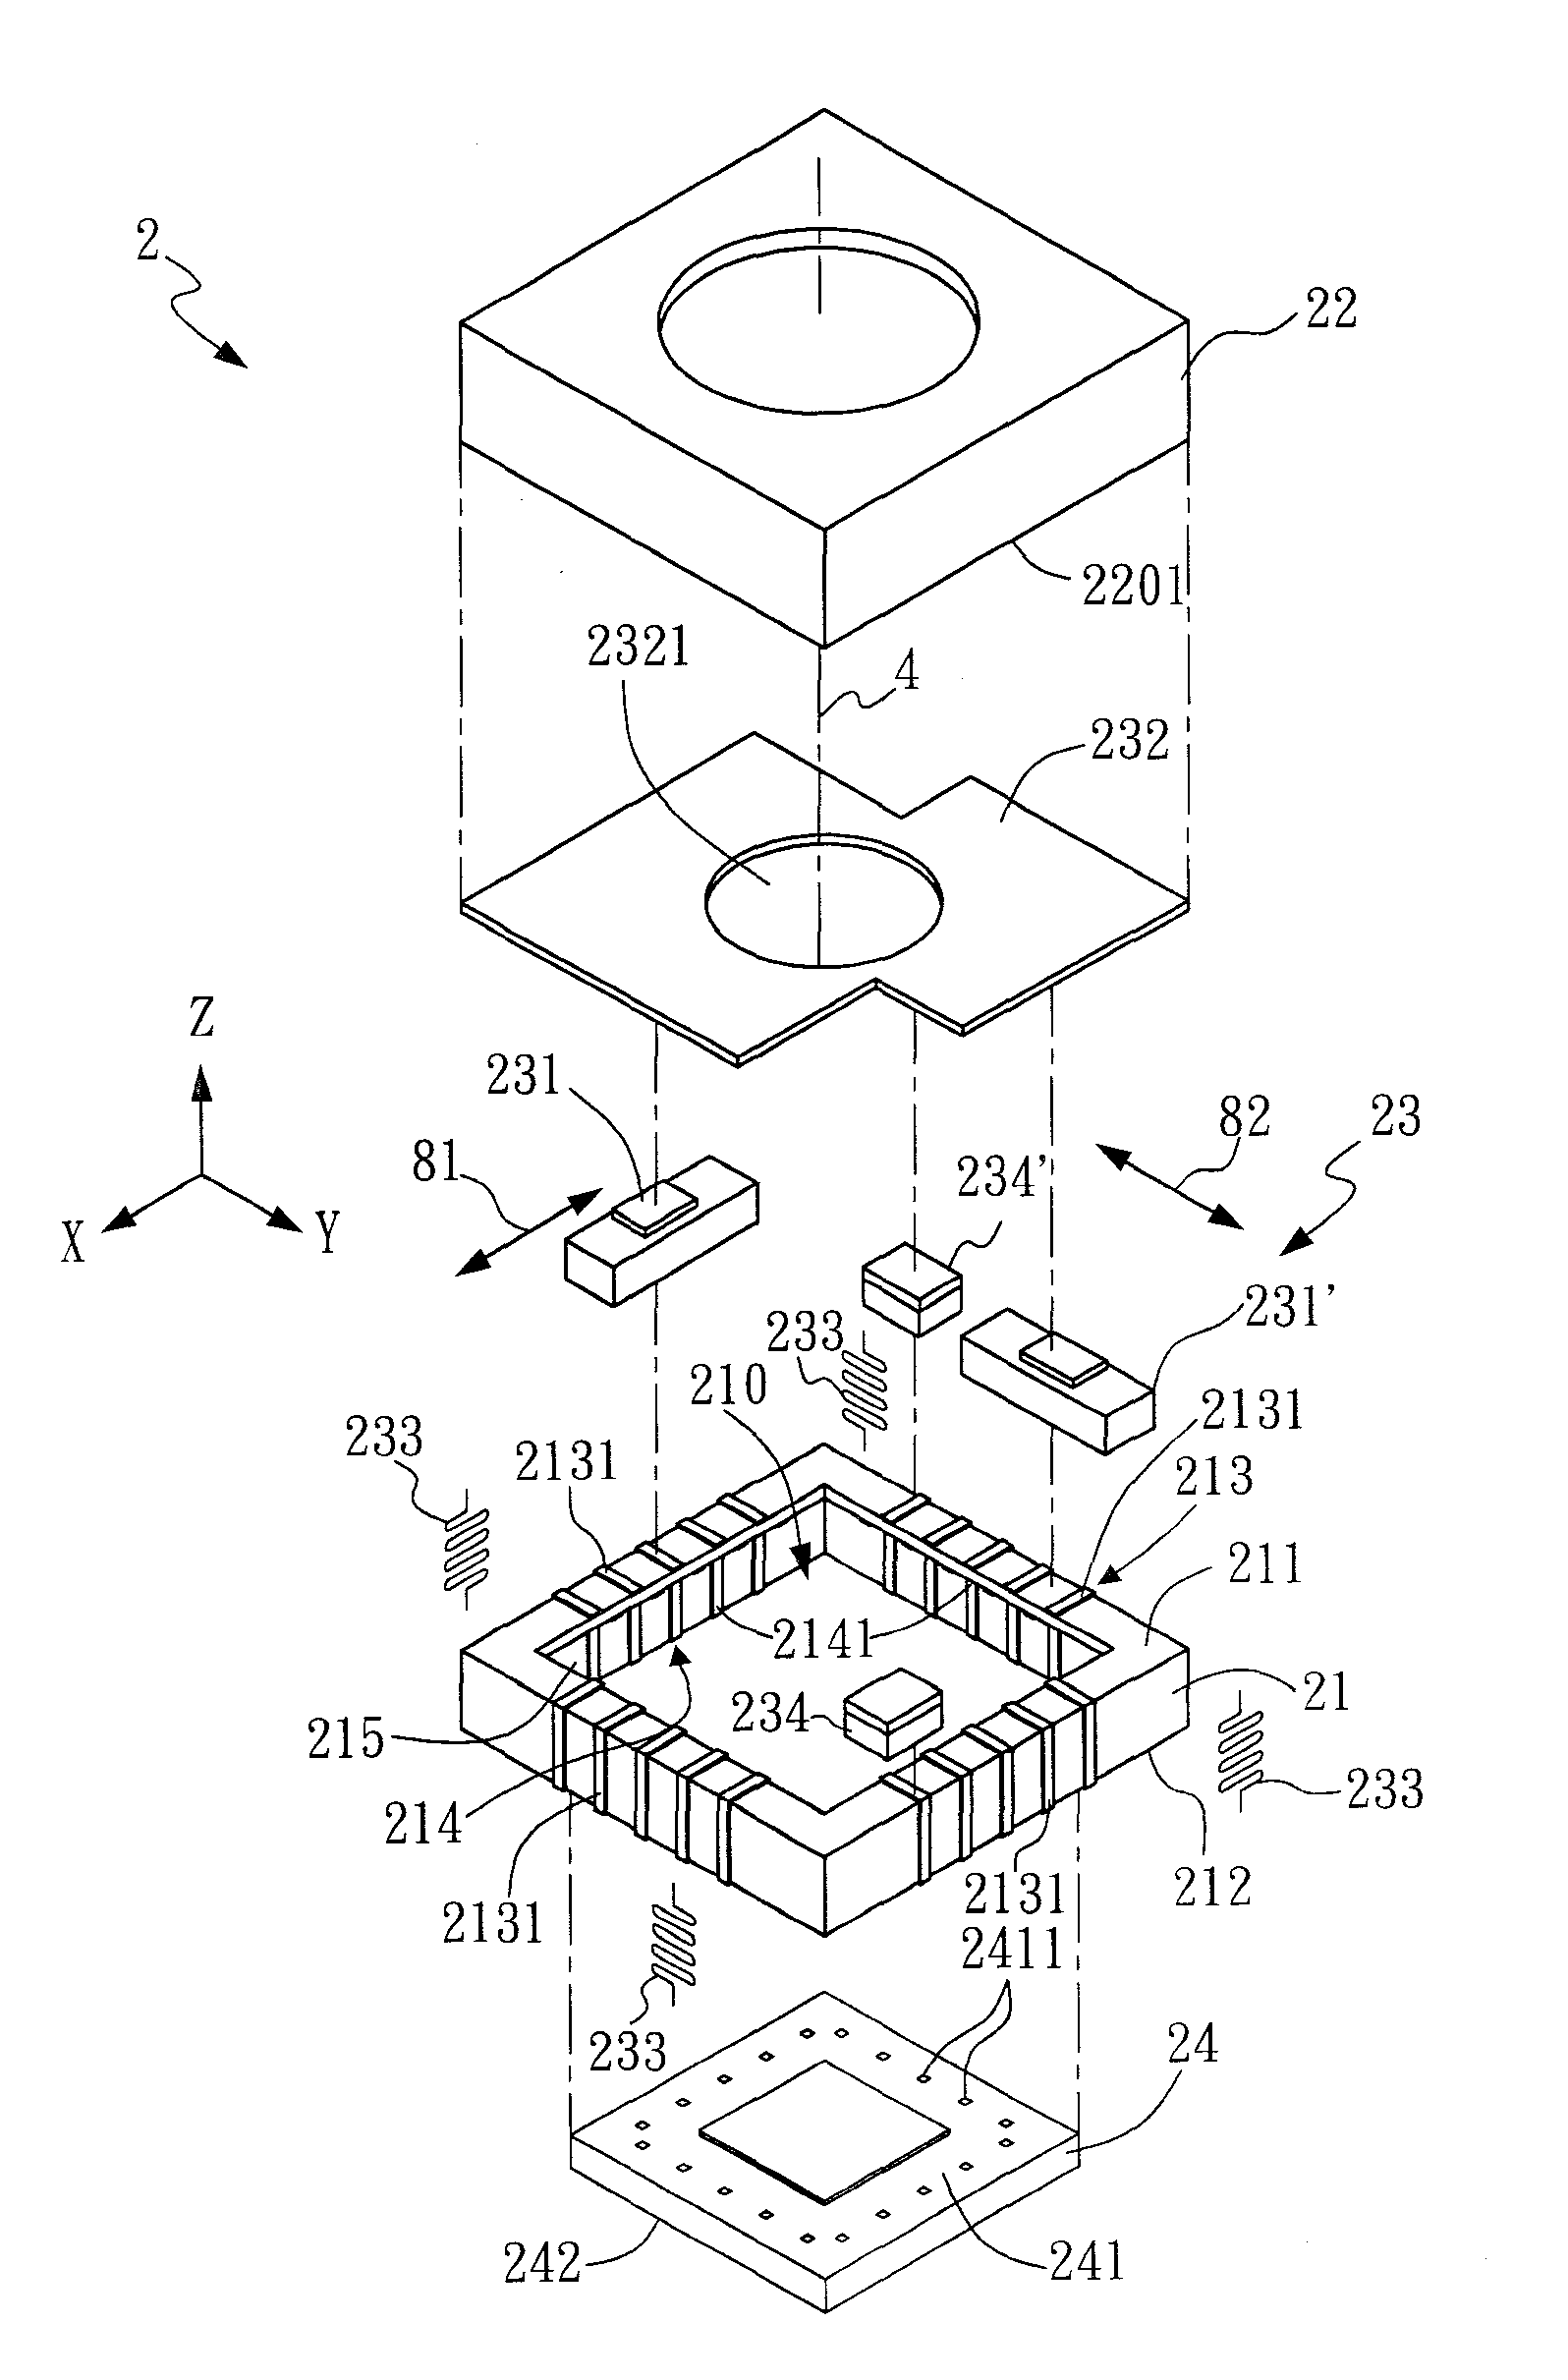 Integrated Substrate for Anti-Shake Apparatus